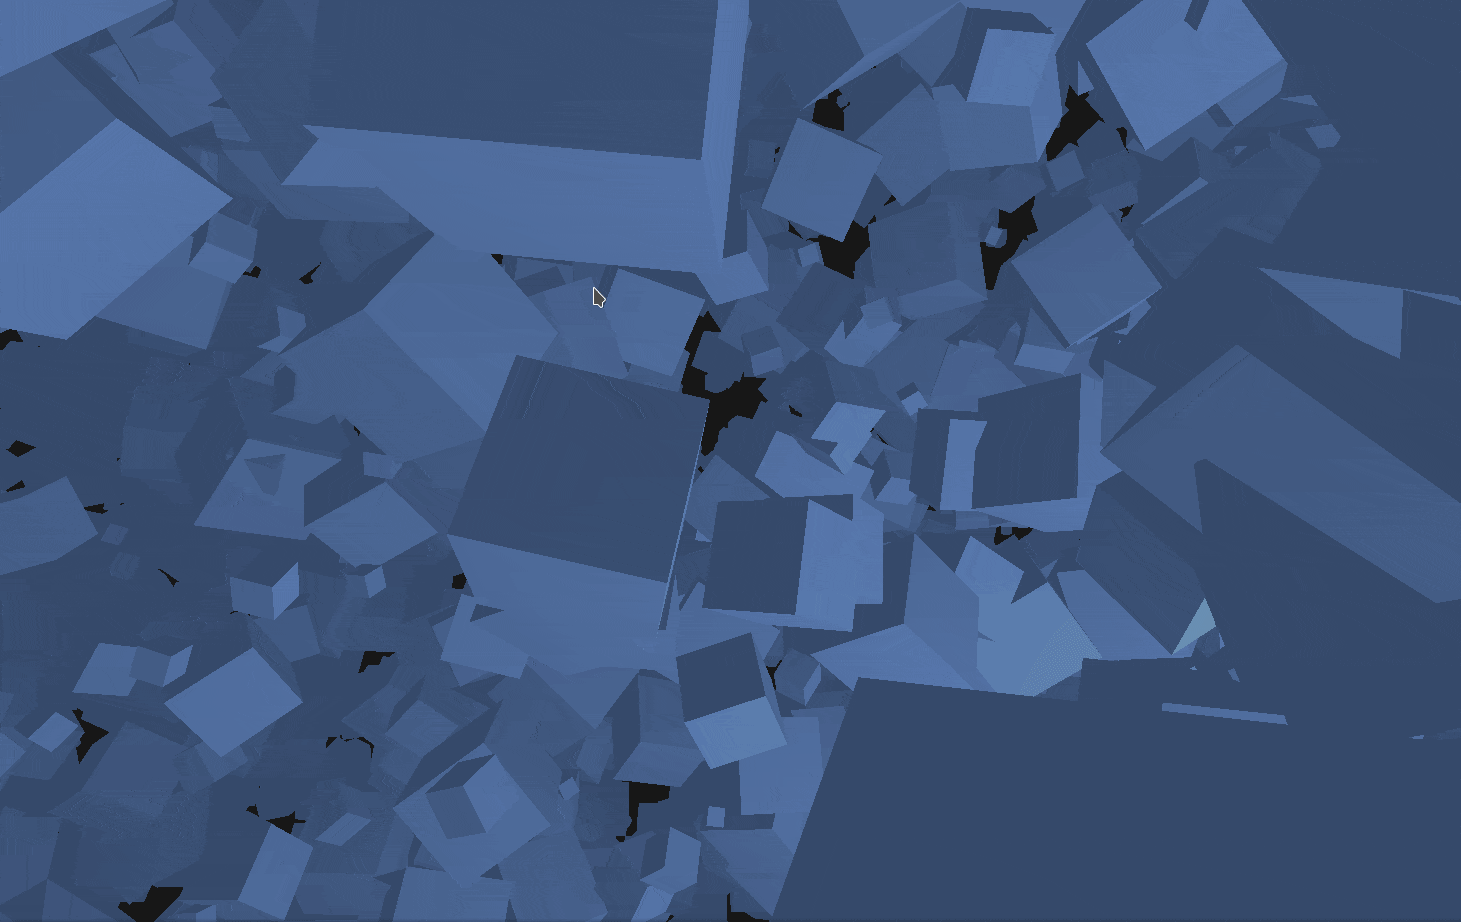 A lot of cubes floating in empty space